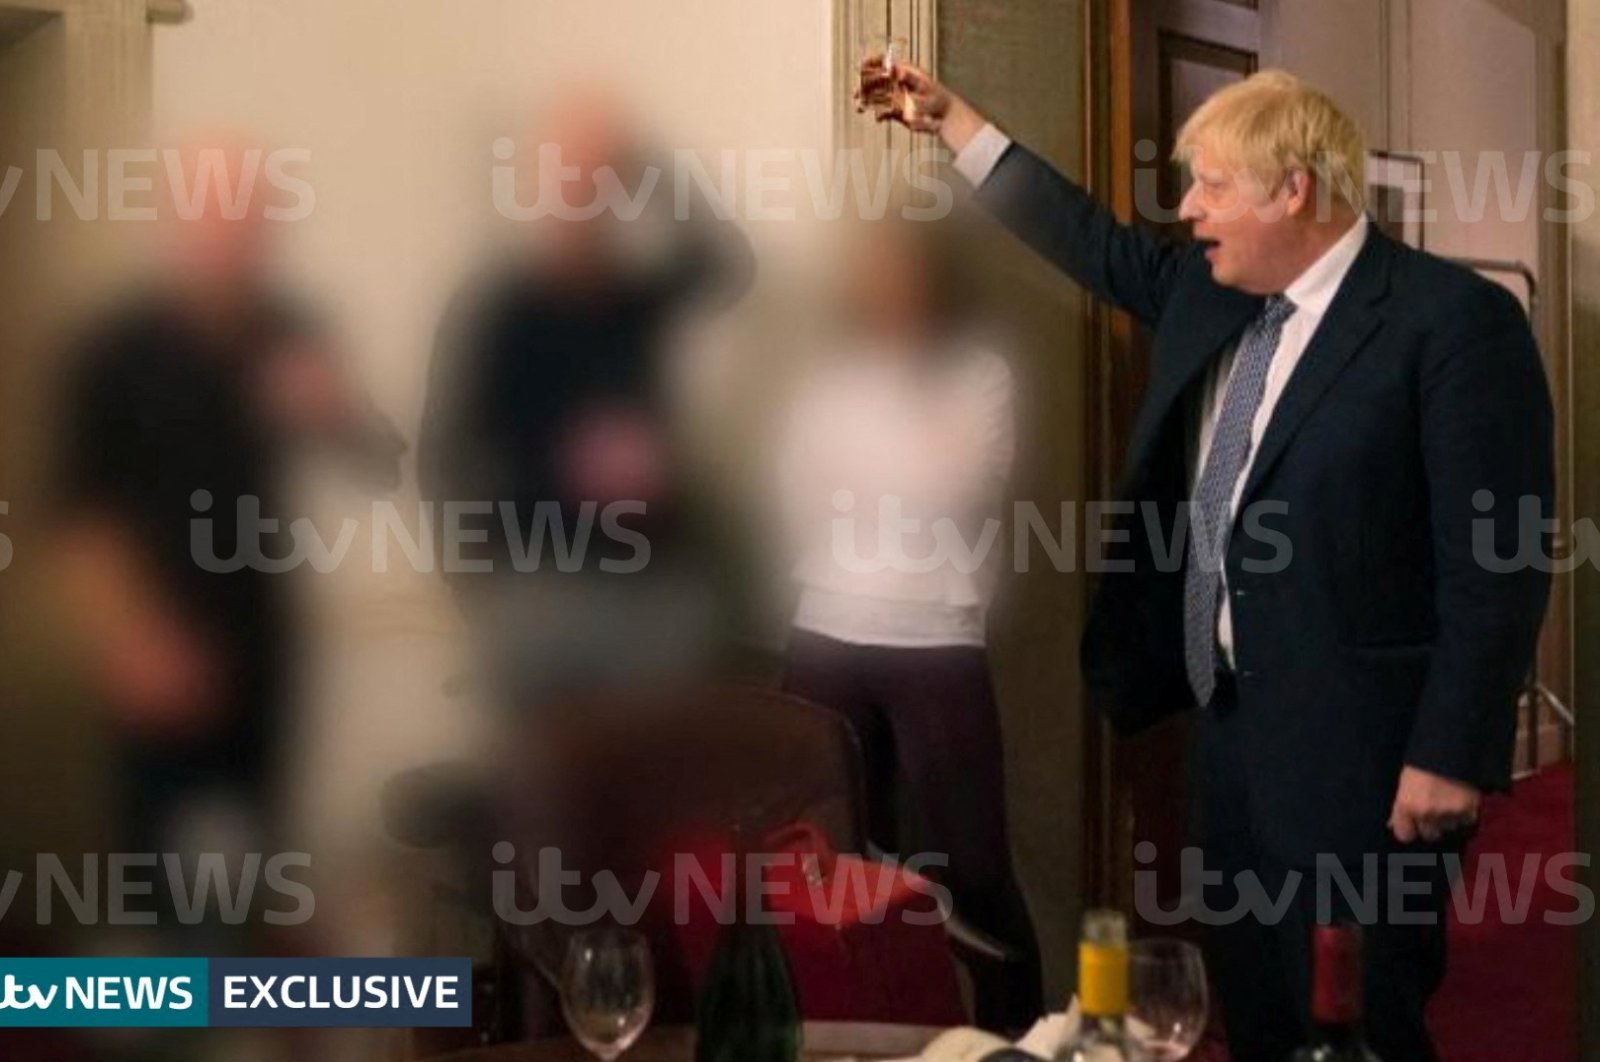 A handout picture shows British Prime Minister Boris Johnson raising a glass during a party at Downing Street amid the COVID-19 pandemic in London, U.K., Nov. 13, 2020. (ITV News via Reuters)